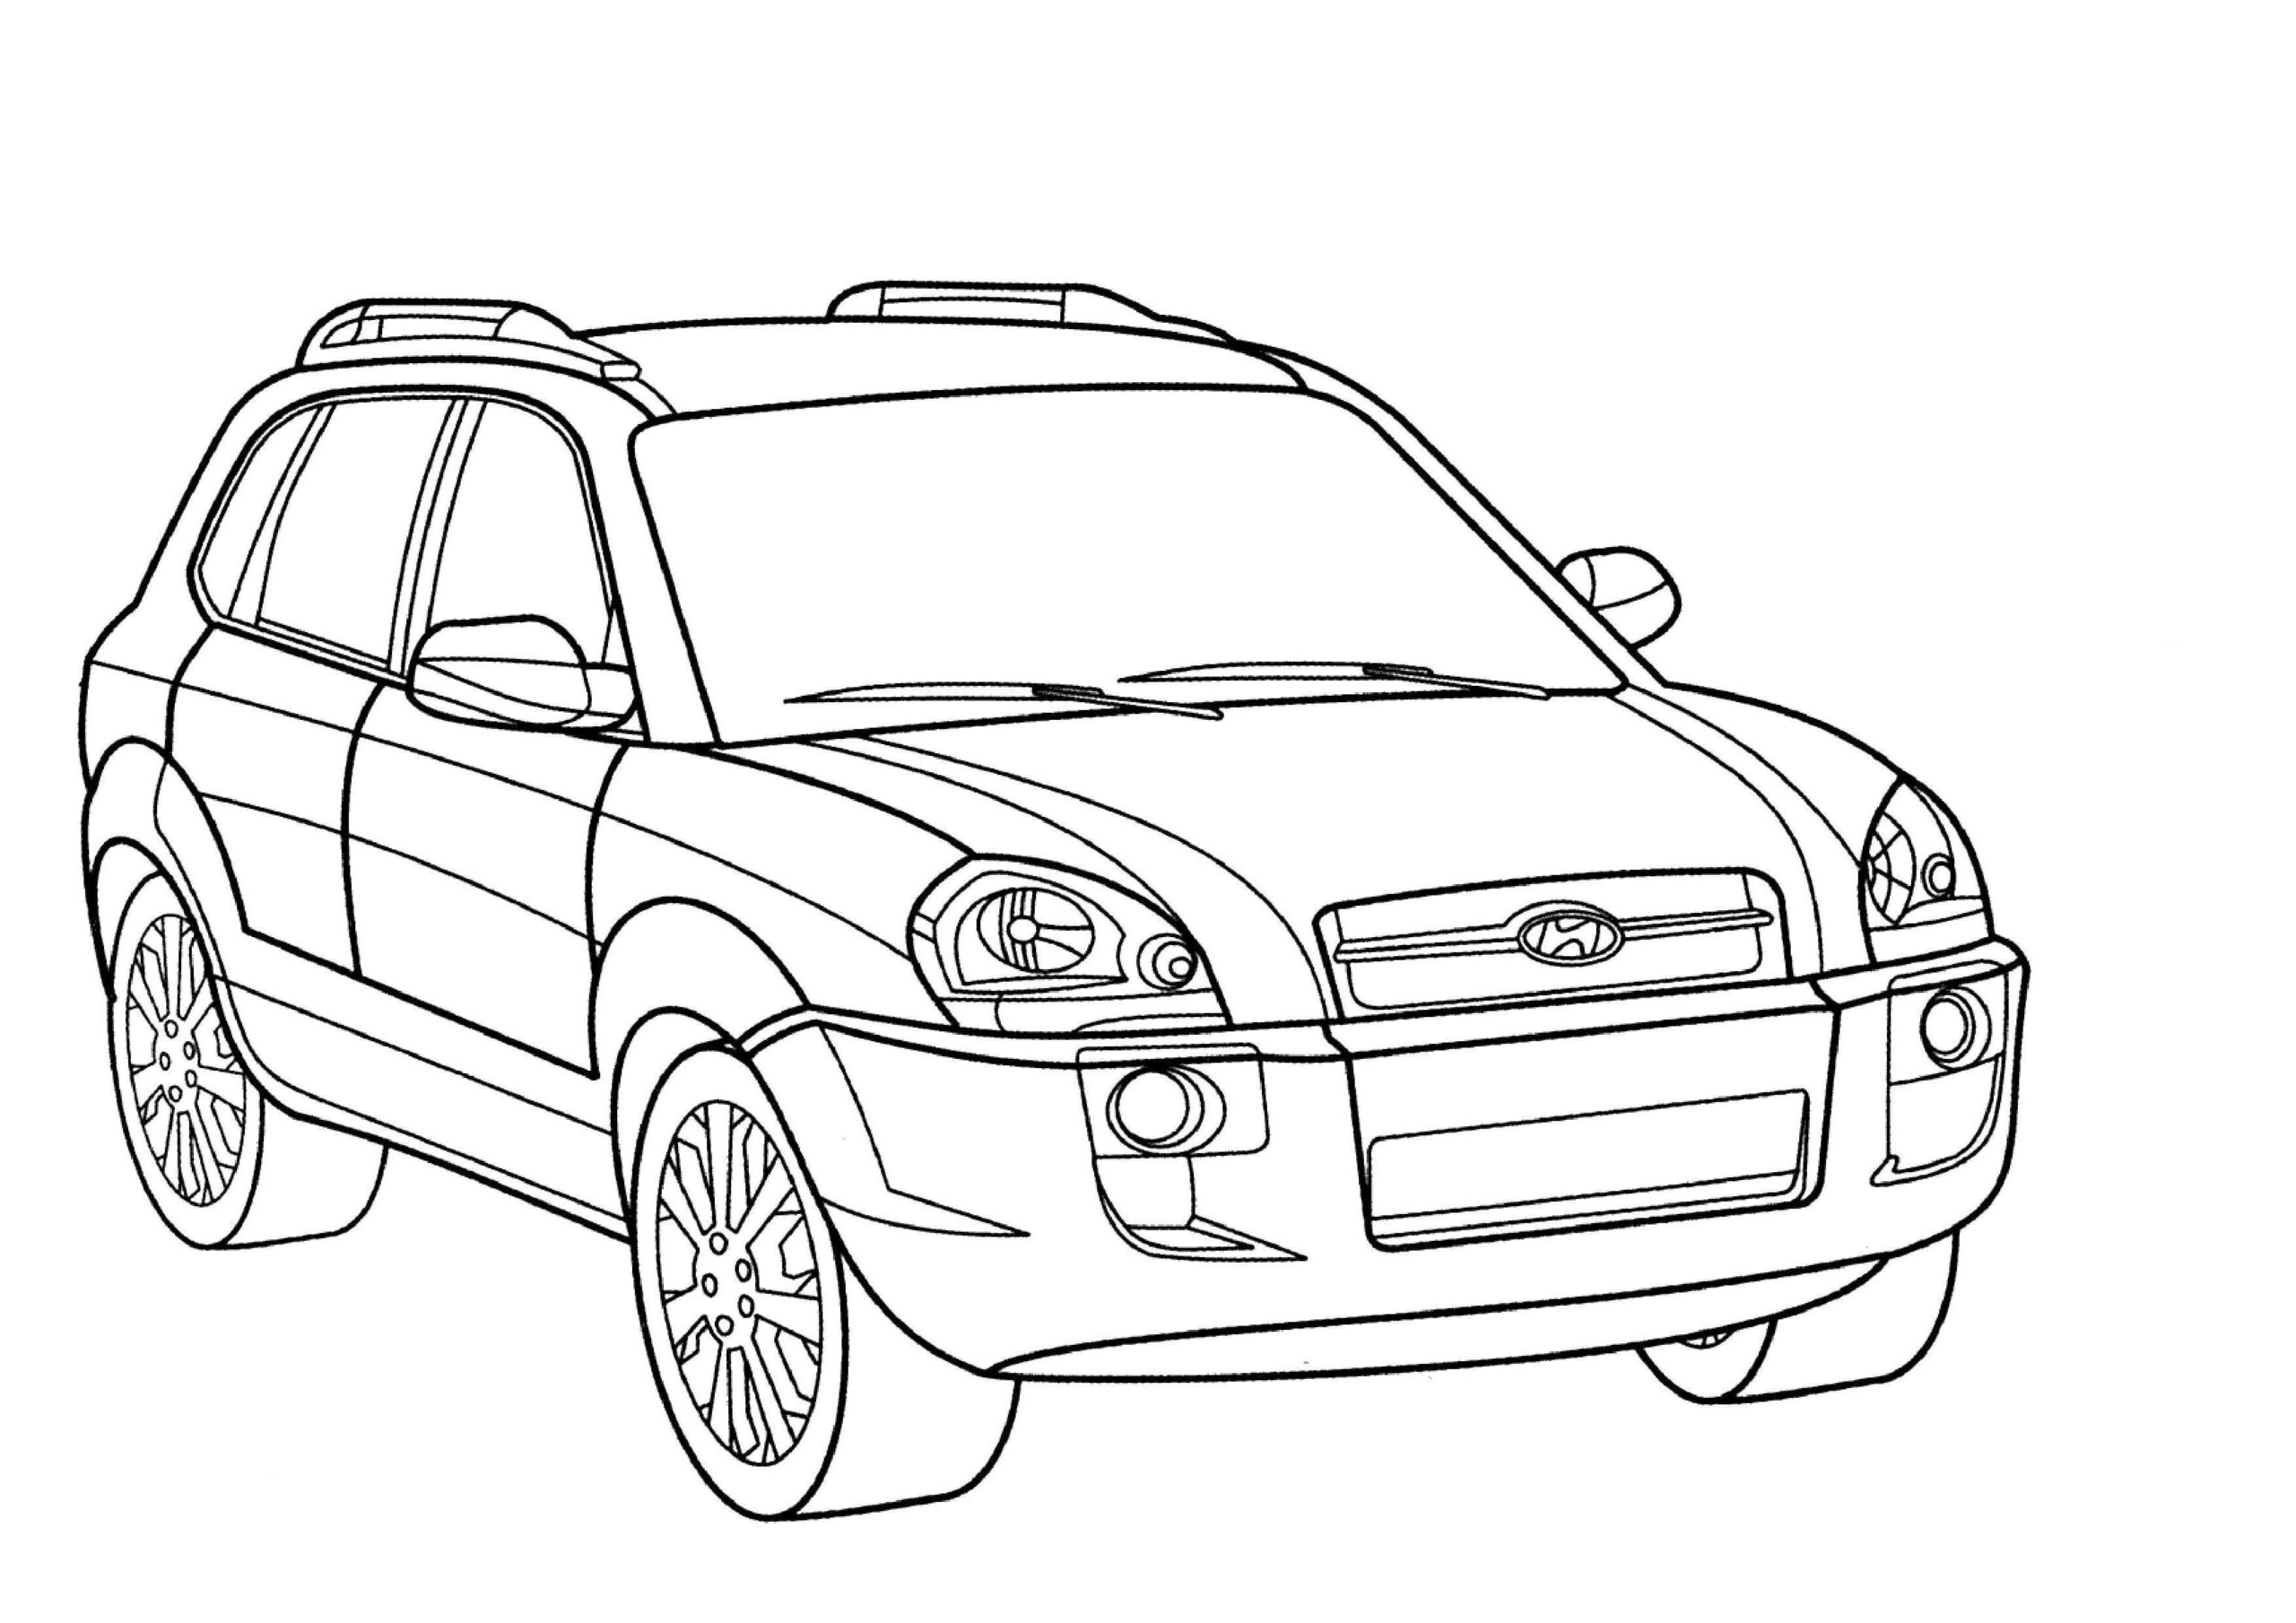 Hyundai Tuscon coloring book to print and online